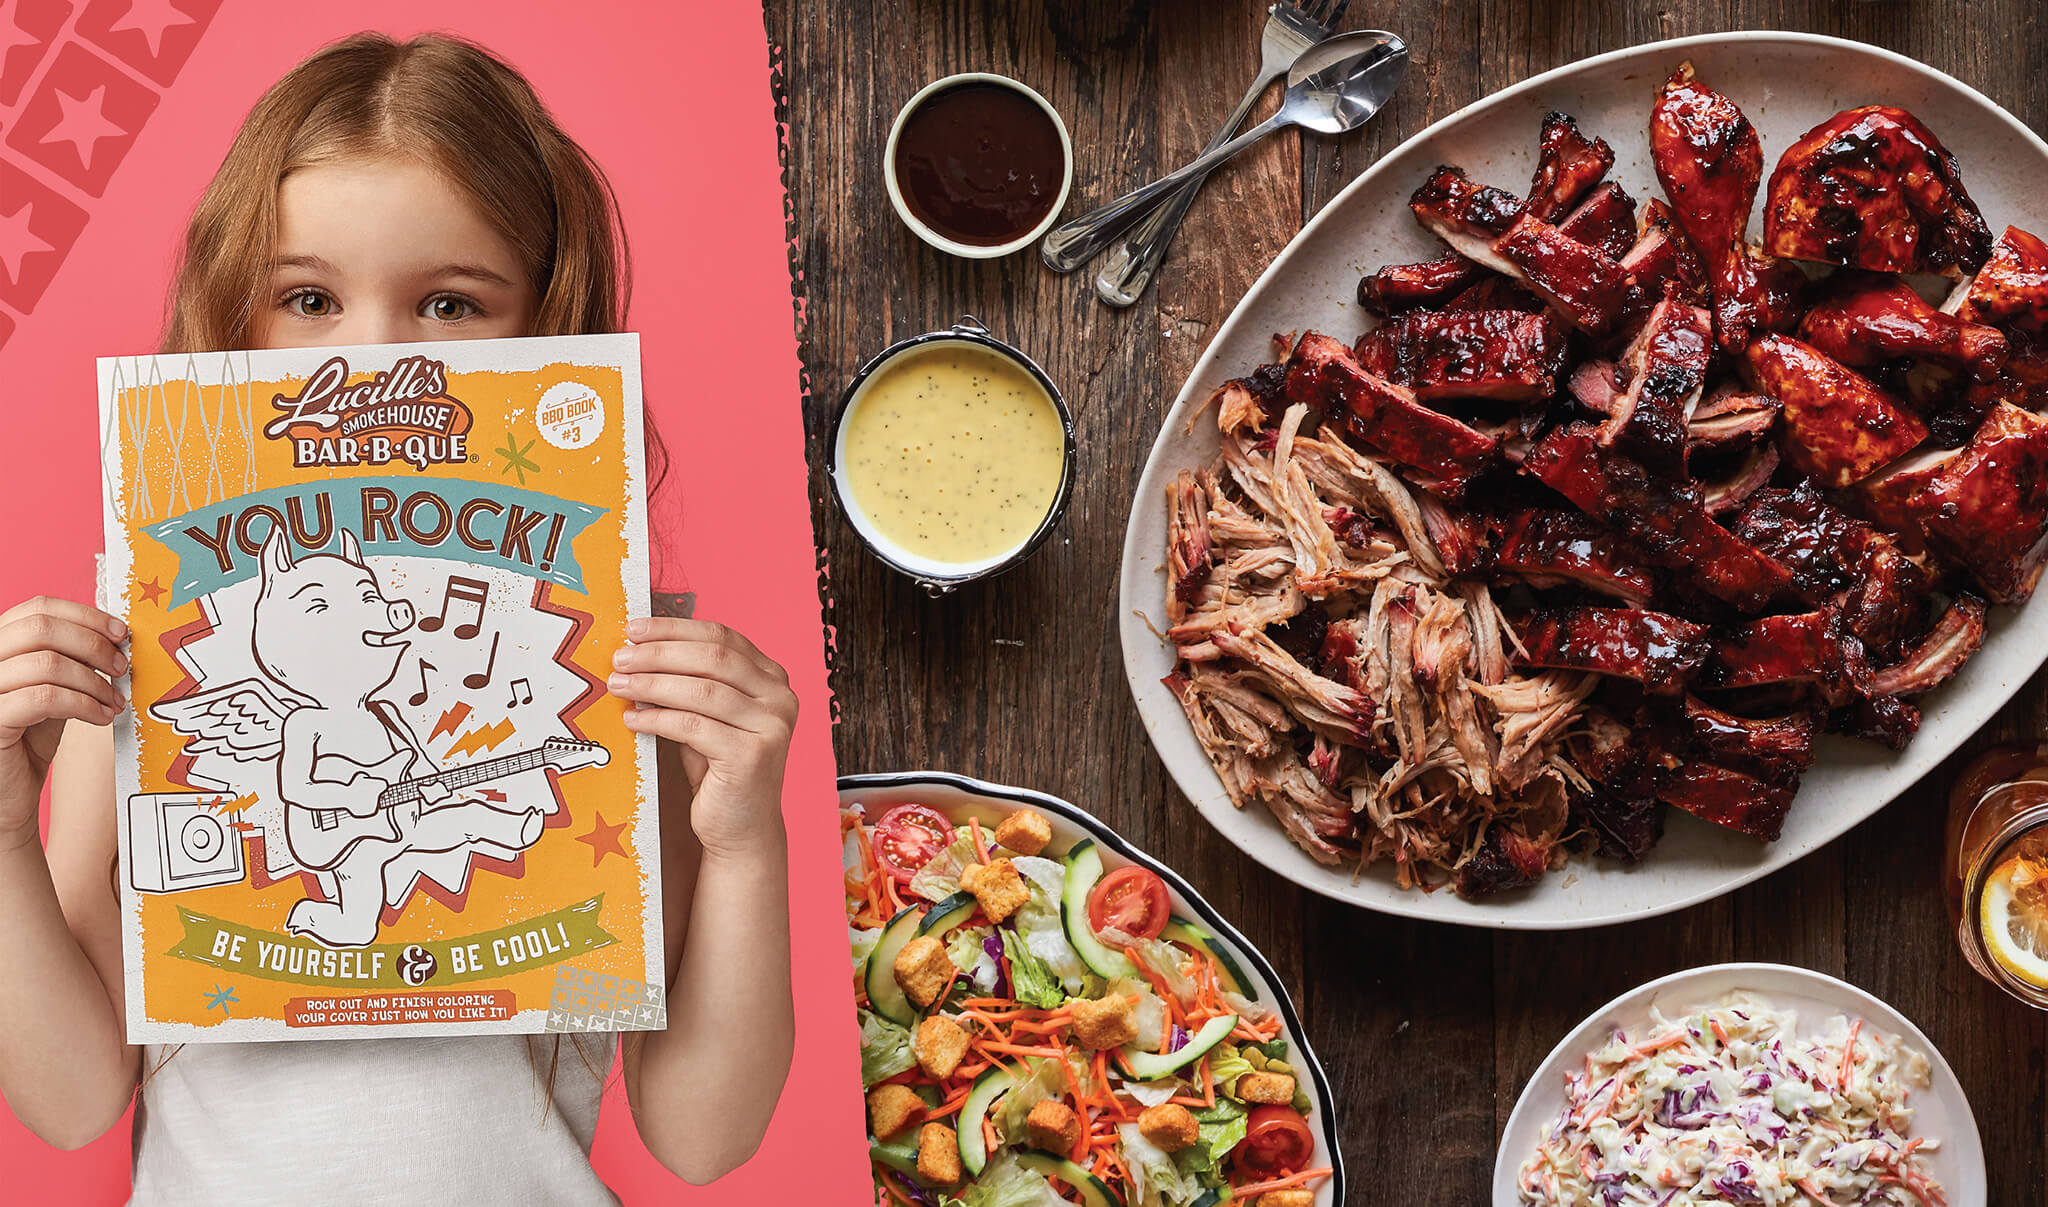 B-B-Q &amp; A: 3 Questions with Joan Hansen, VP Marketing for Lucille’s Smokehouse Bar-B-Que